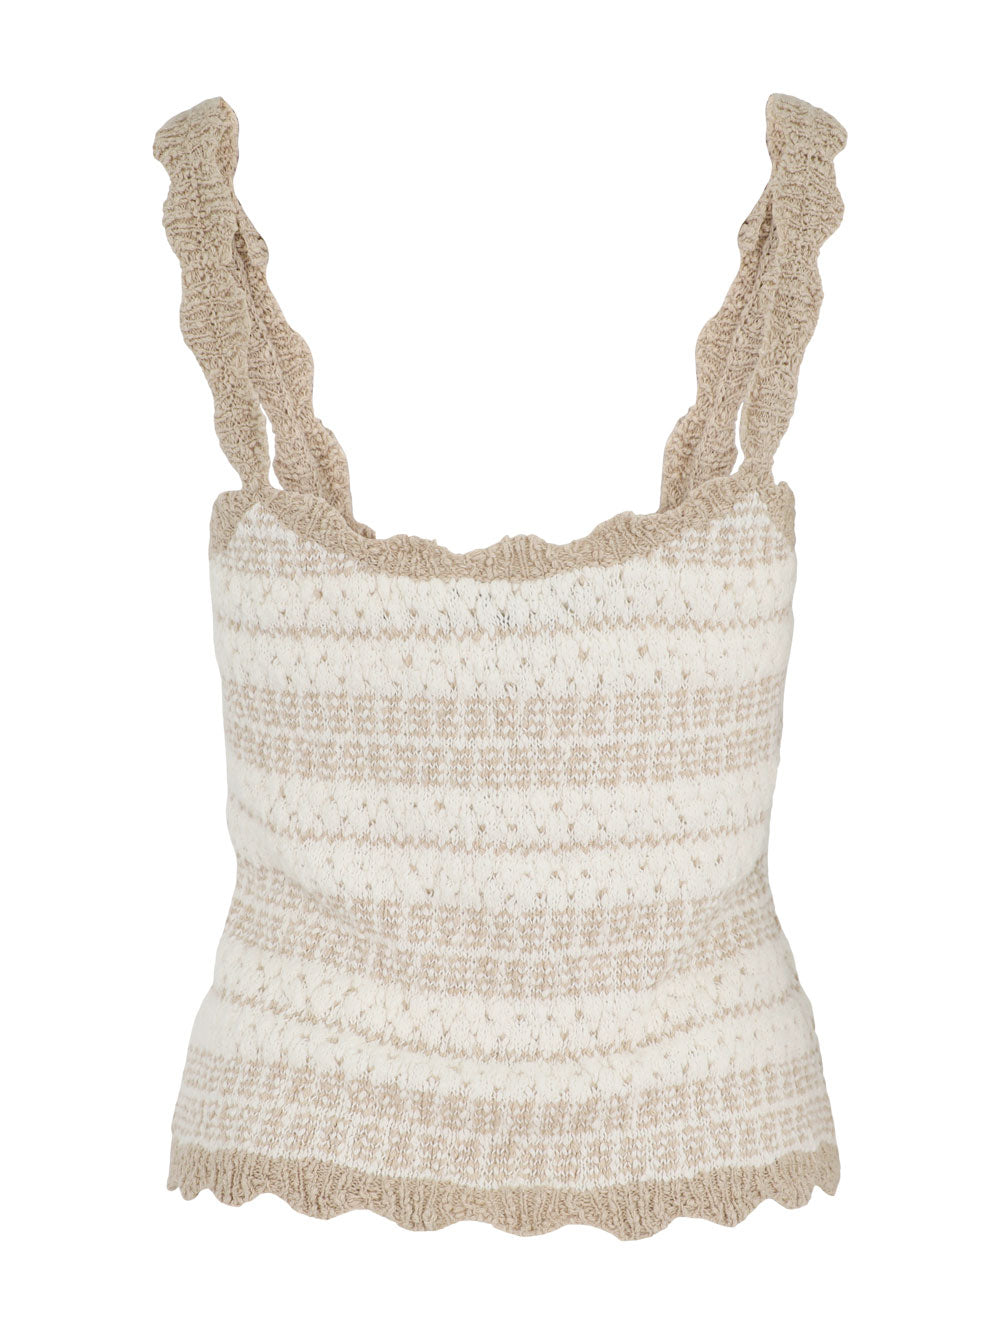 Autumn Cashmere Textured Scalloped Tank (More Colors)